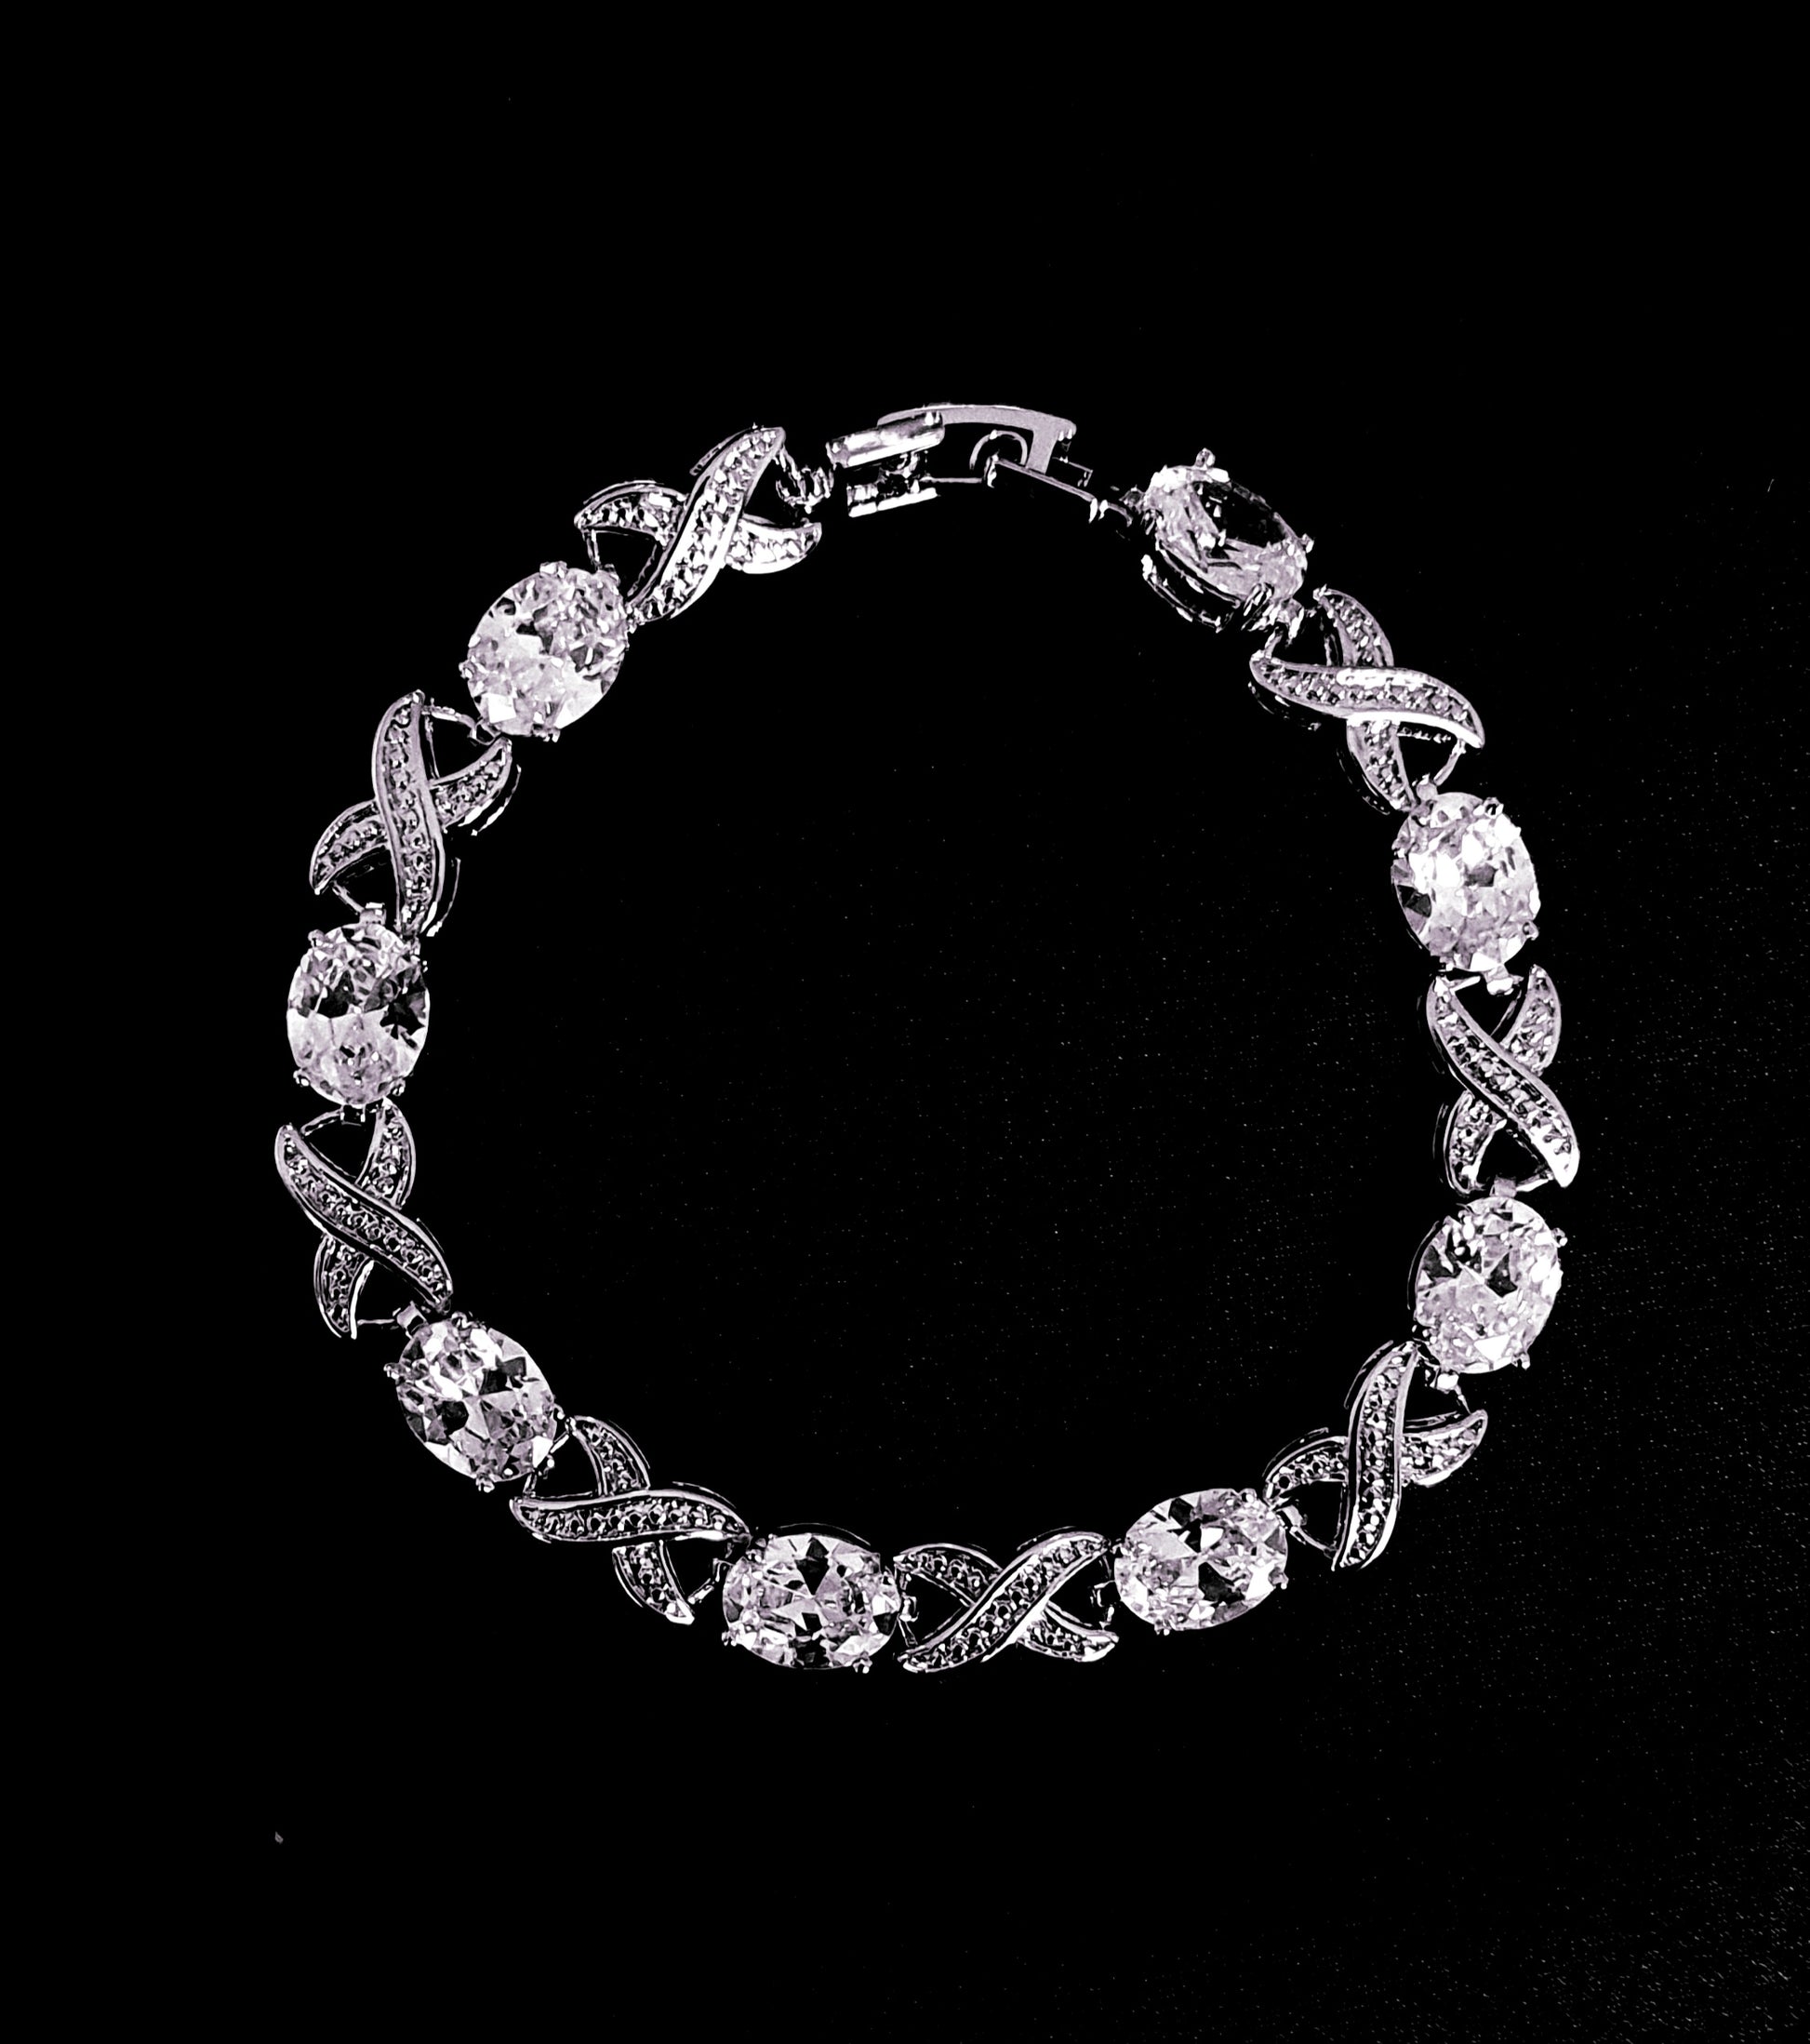 A close-up of a silver bracelet with a single row of white diamonds on a black background. The bracelet is simple in design and the diamonds are sparkling.